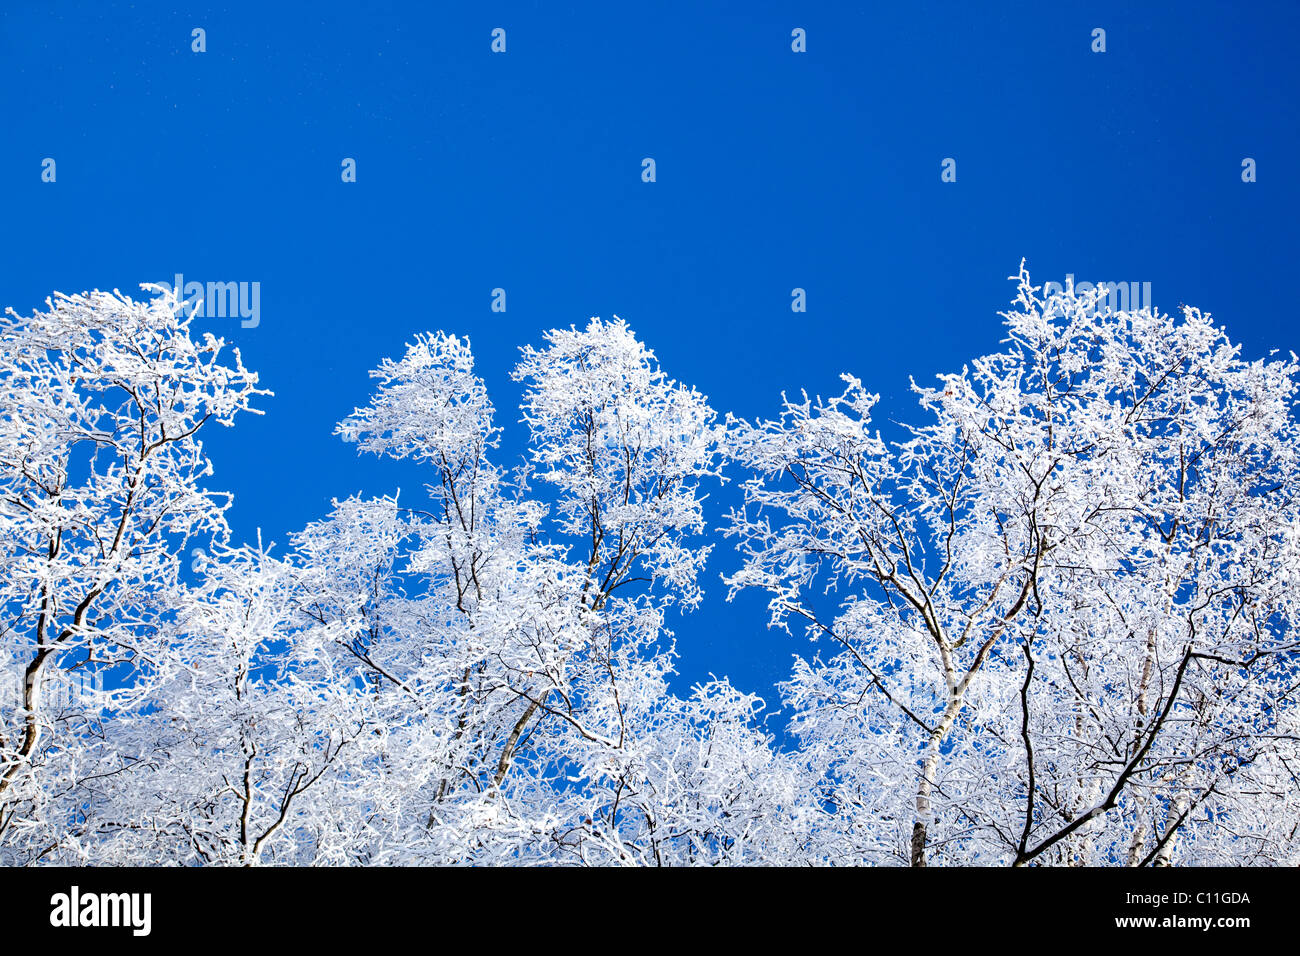 Snow-covered birch trees in snowy winter landscape in the Bavarian Forest near St. Englmar, Bavaria, Germany, Europe Stock Photo